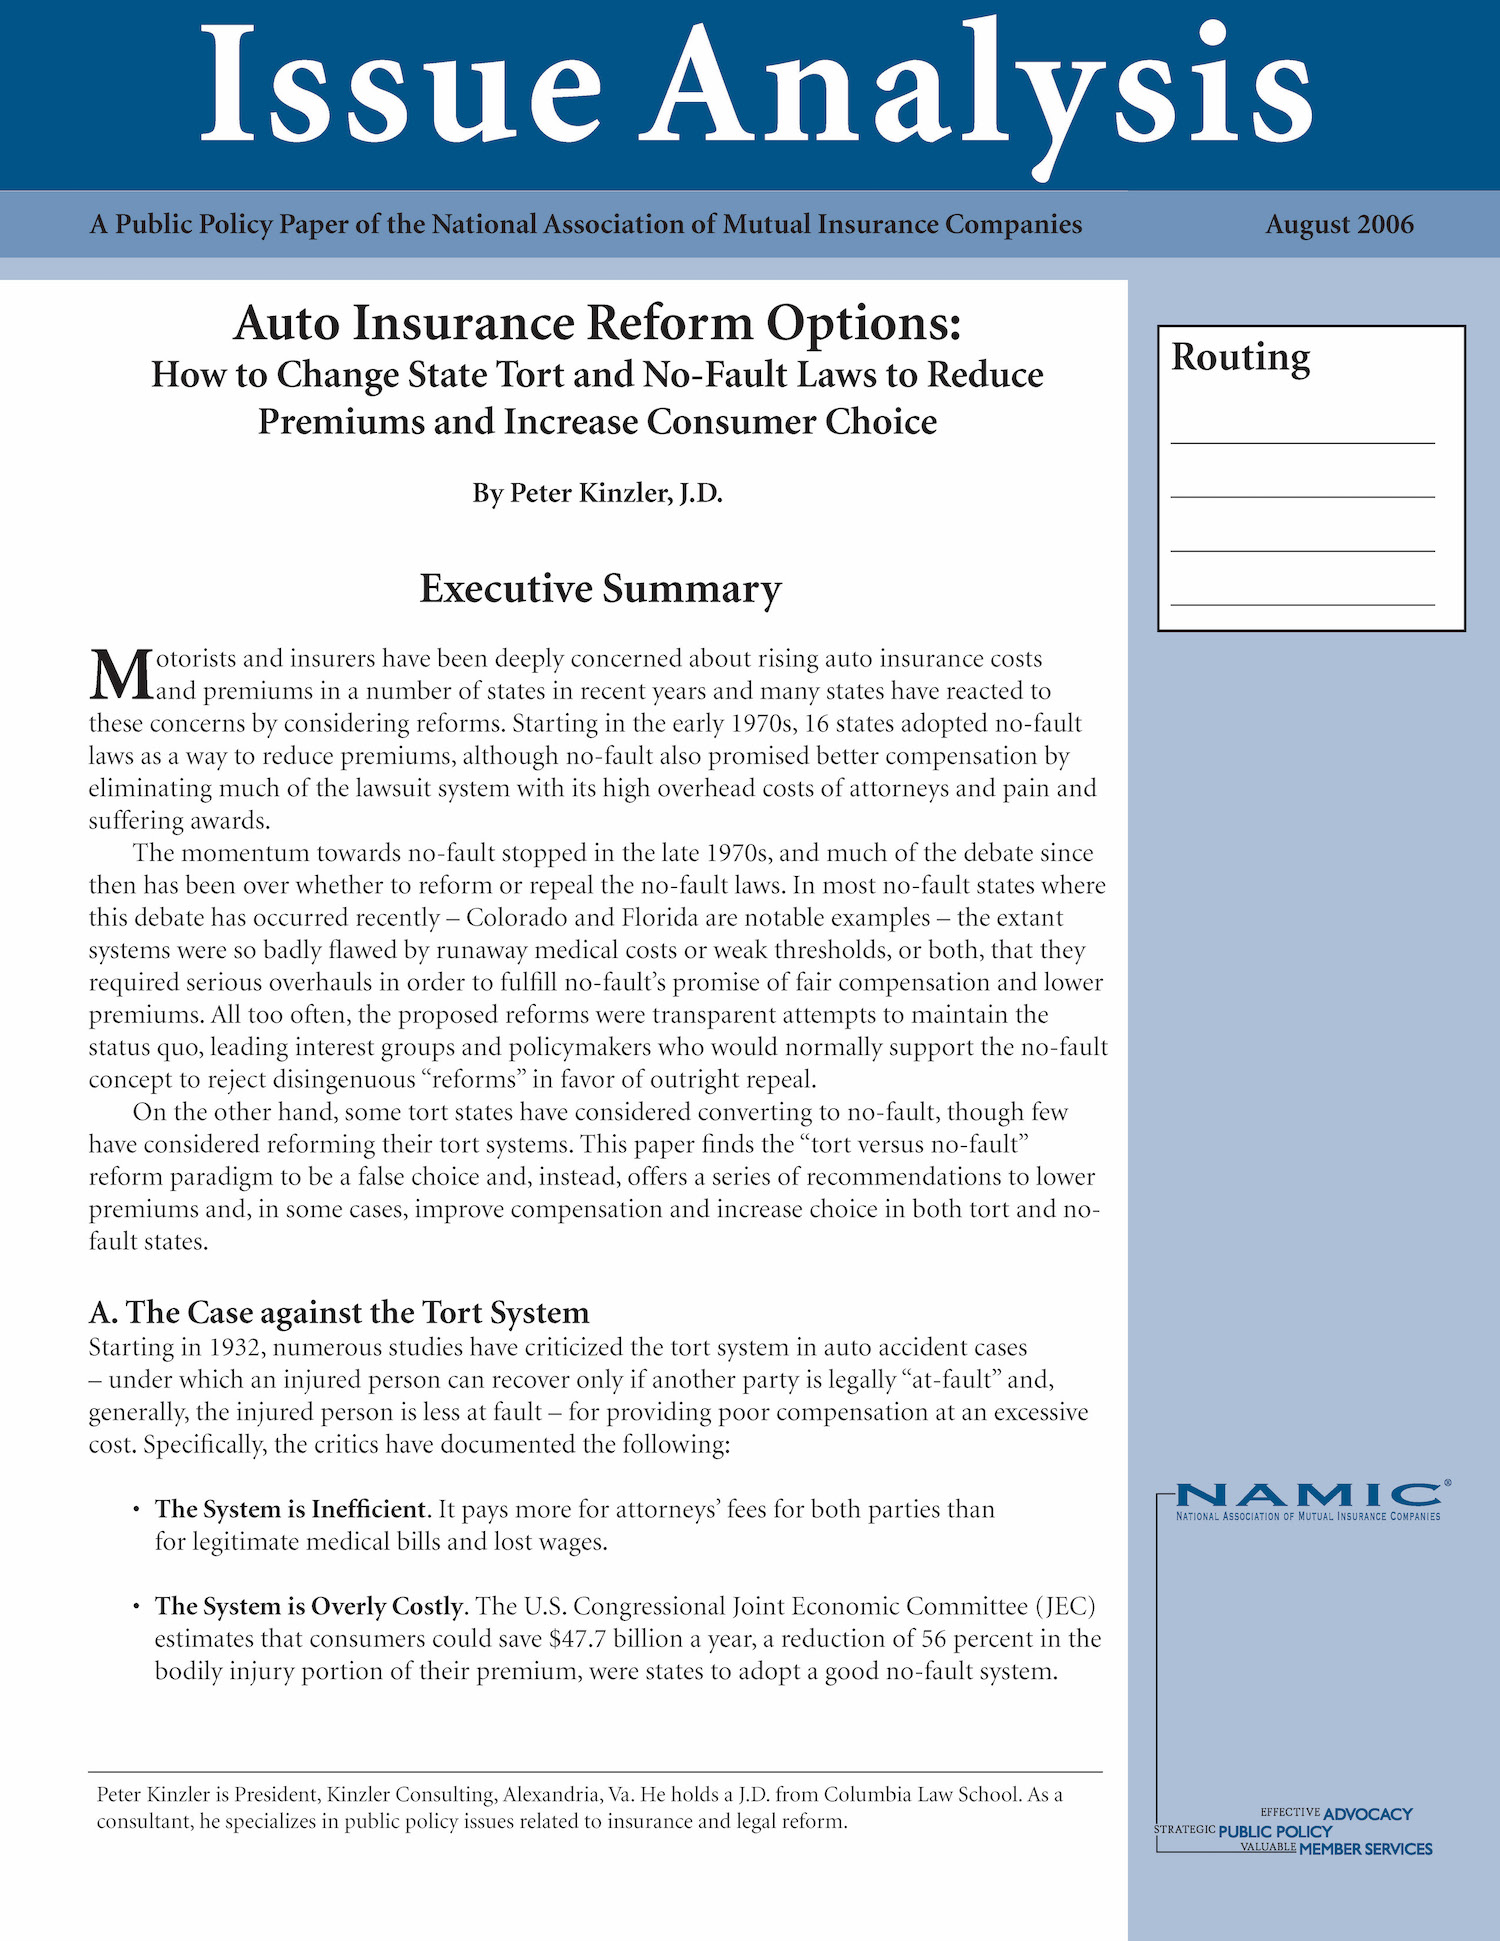 Auto Insurance Reform Options: How to Change State Tort and No-Fault Laws to Reduce Premiums and Increase Consumer Choice PDF